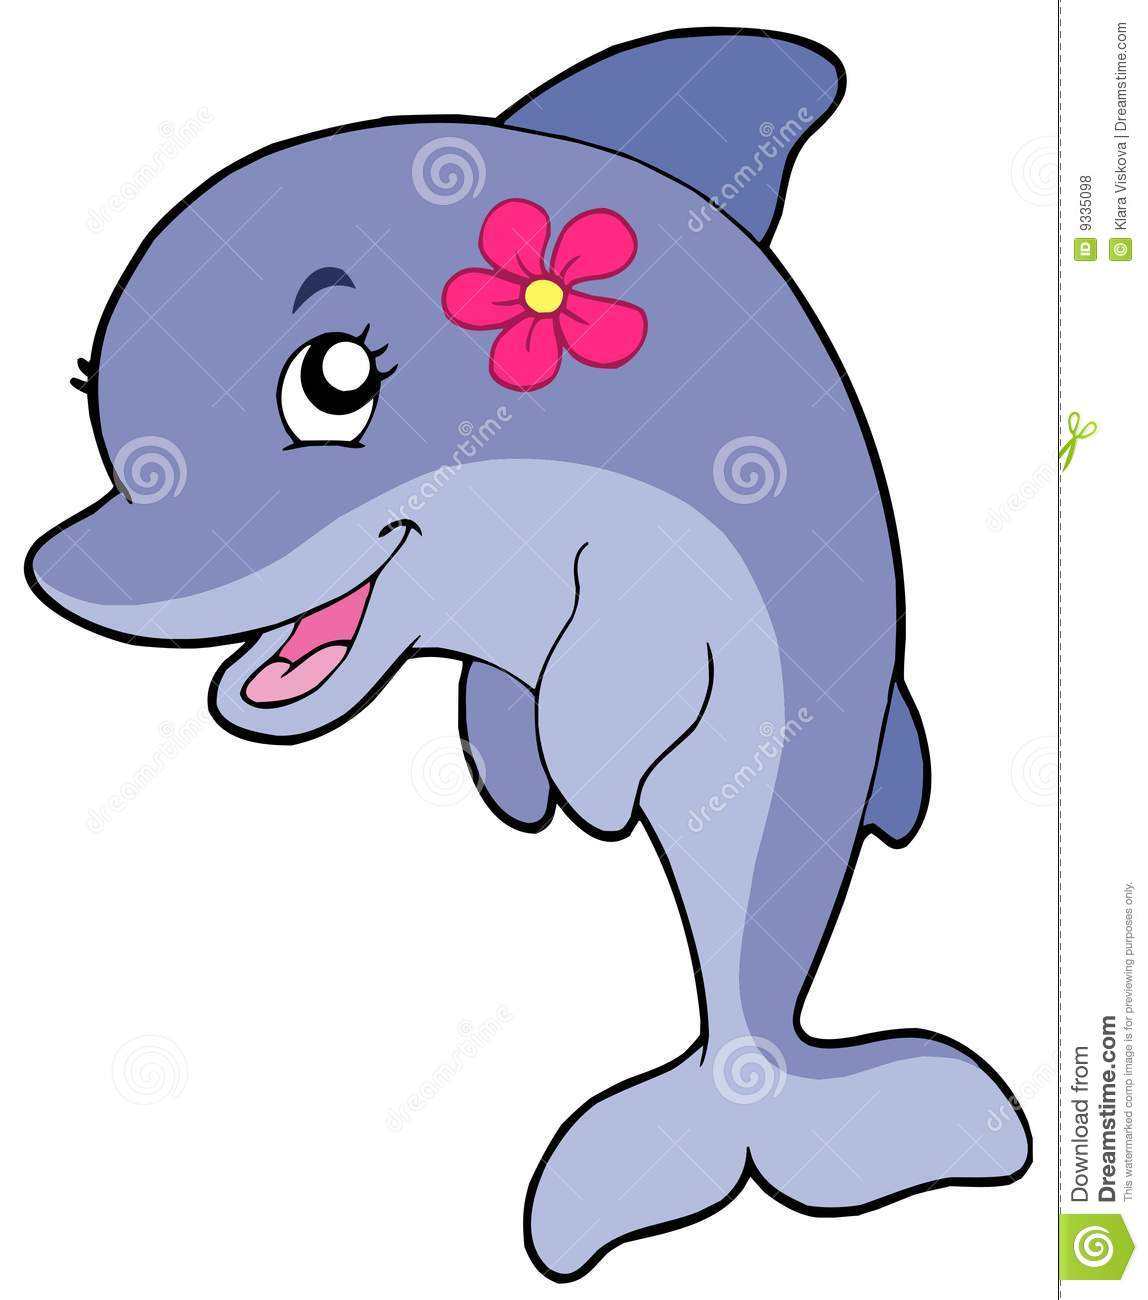 Cute Dolphin Girl With Flower Royalty Free Stock Photos   Image